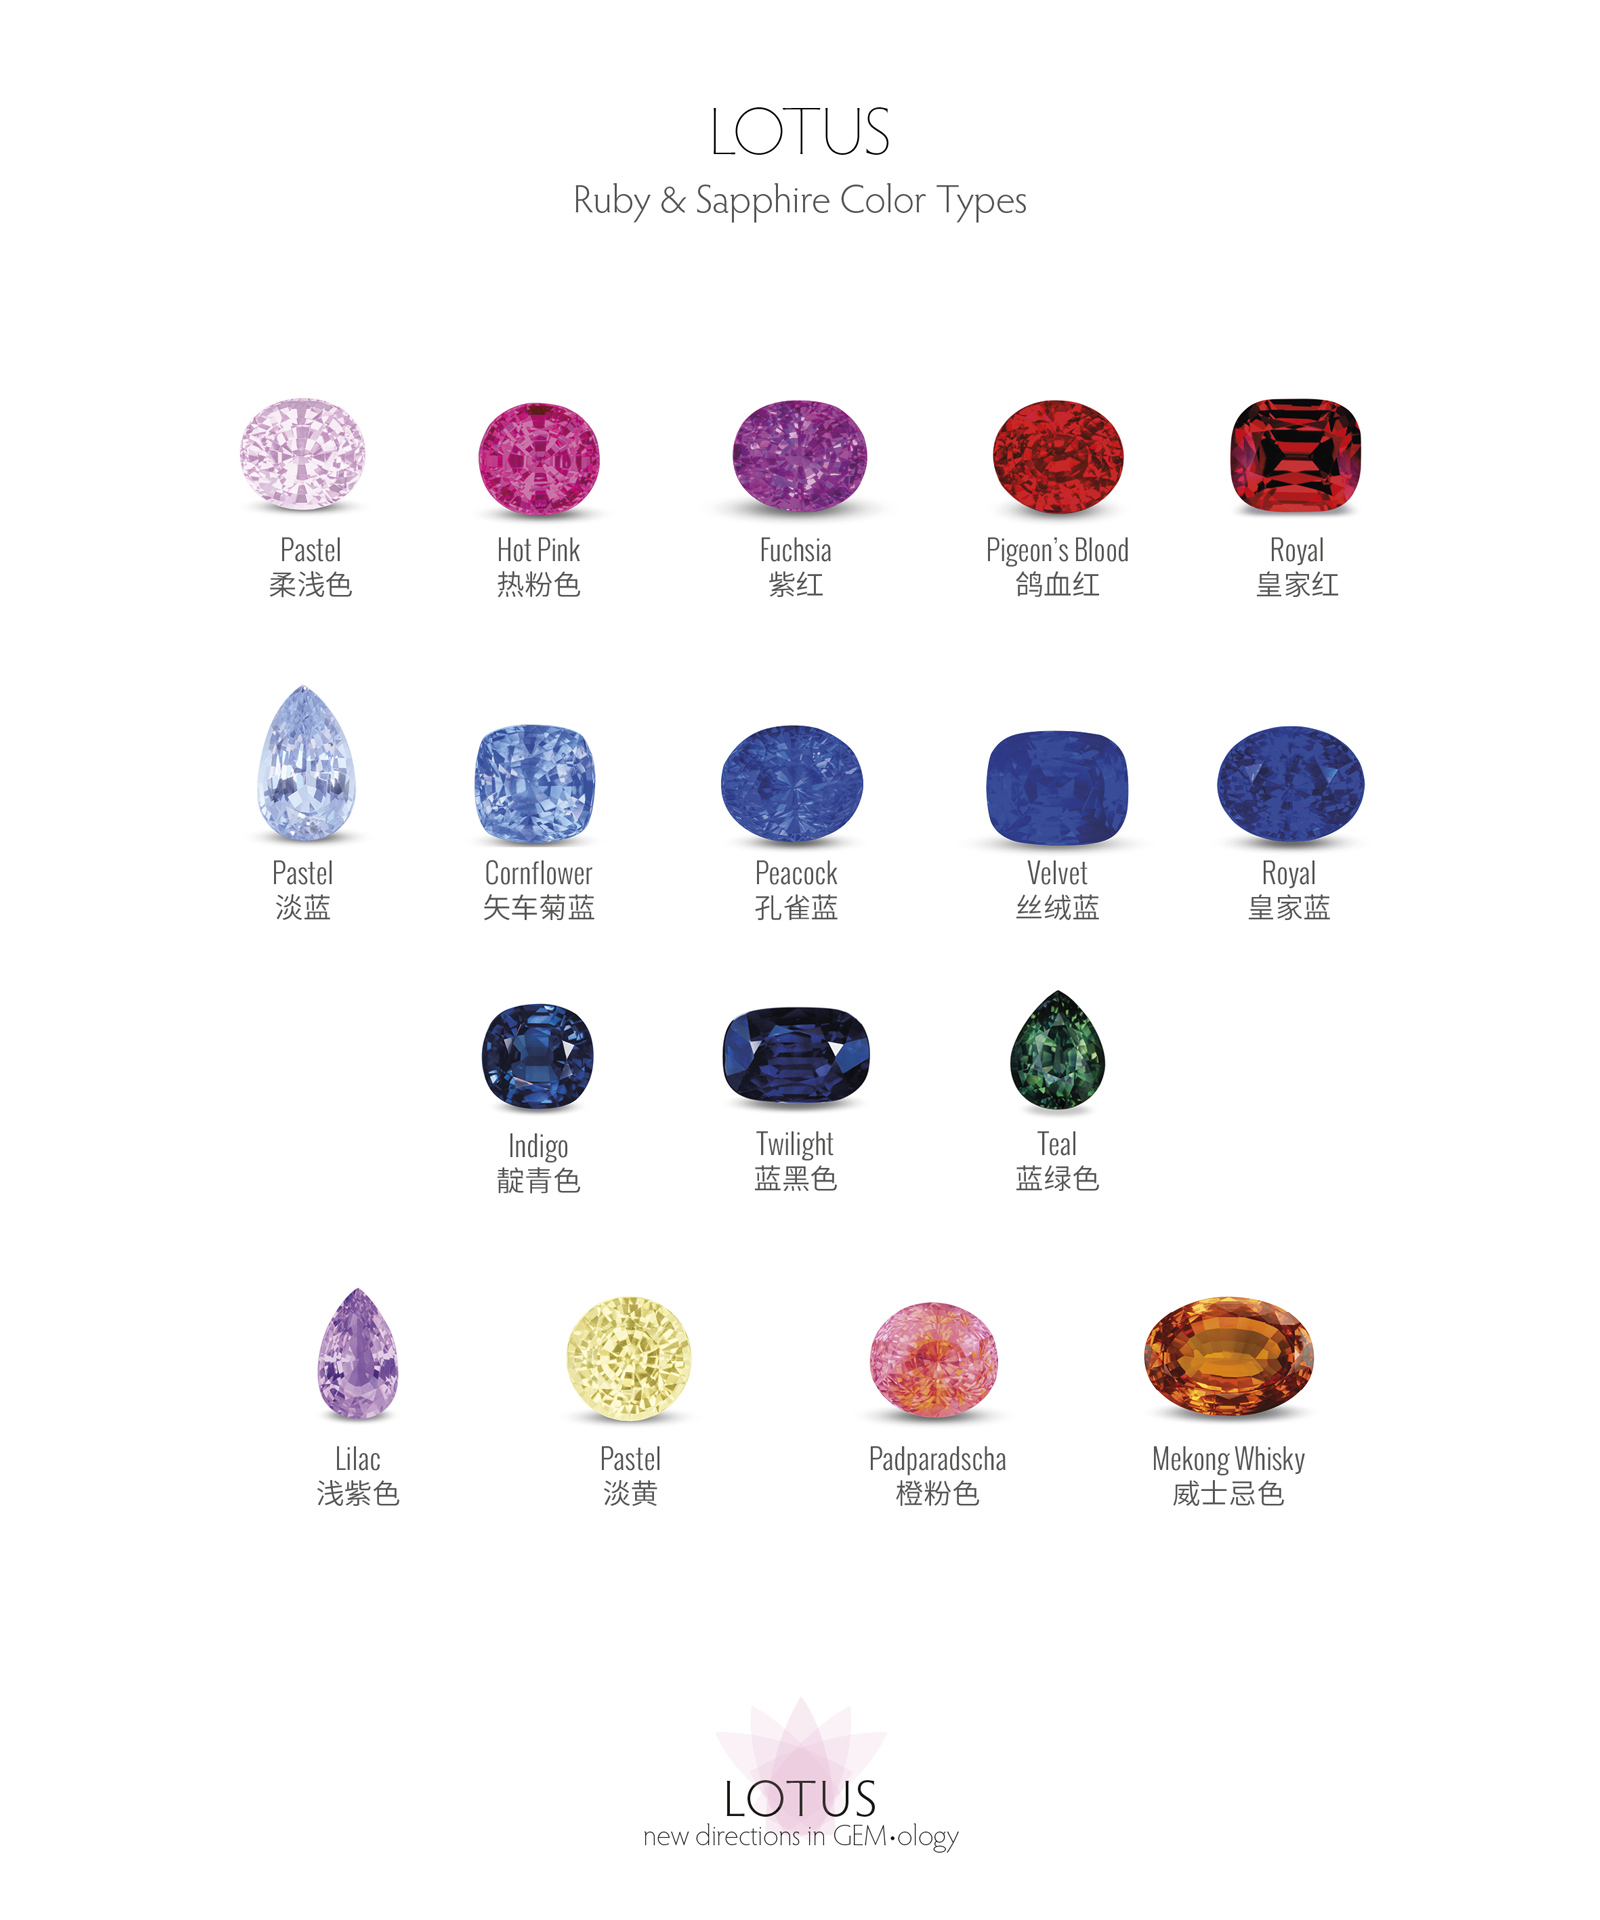 The colors of Ruby and Sapphire